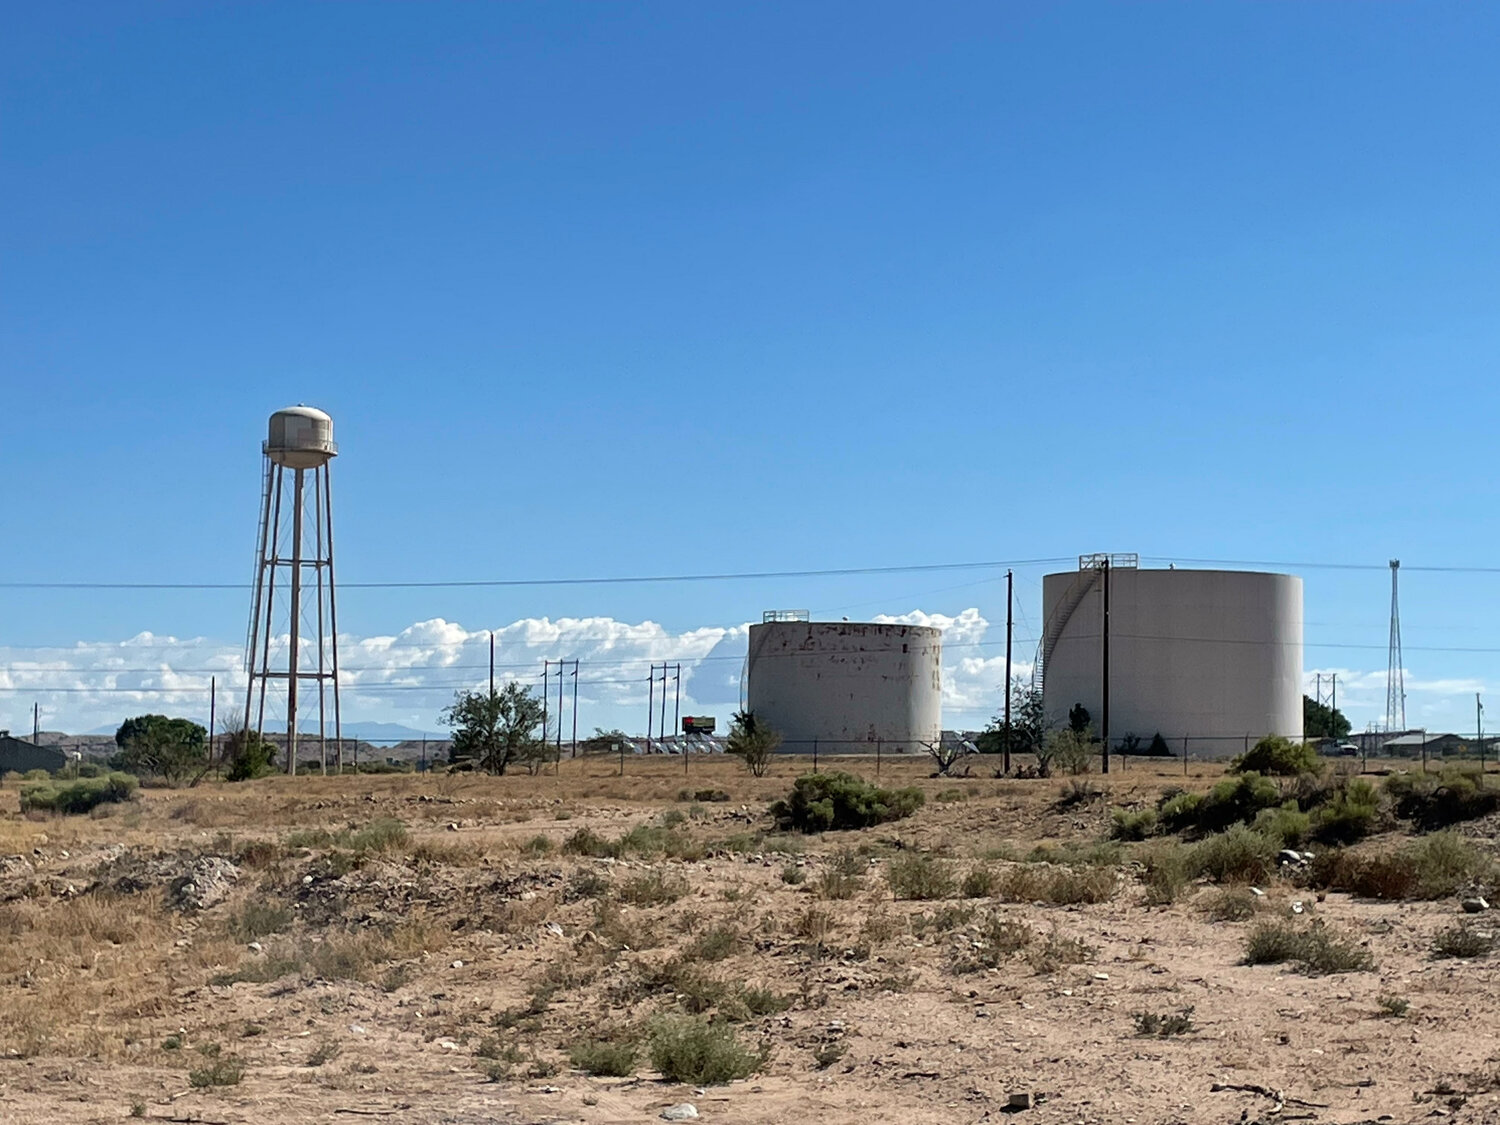 These water tanks owned by PNM are near where Sandoval County plans to install a tank to provide fire suppression at the Algodones business park. The nearly $1 million project is made possible by GeoBrugg, a Swiss corporation that is expanding at the business park.